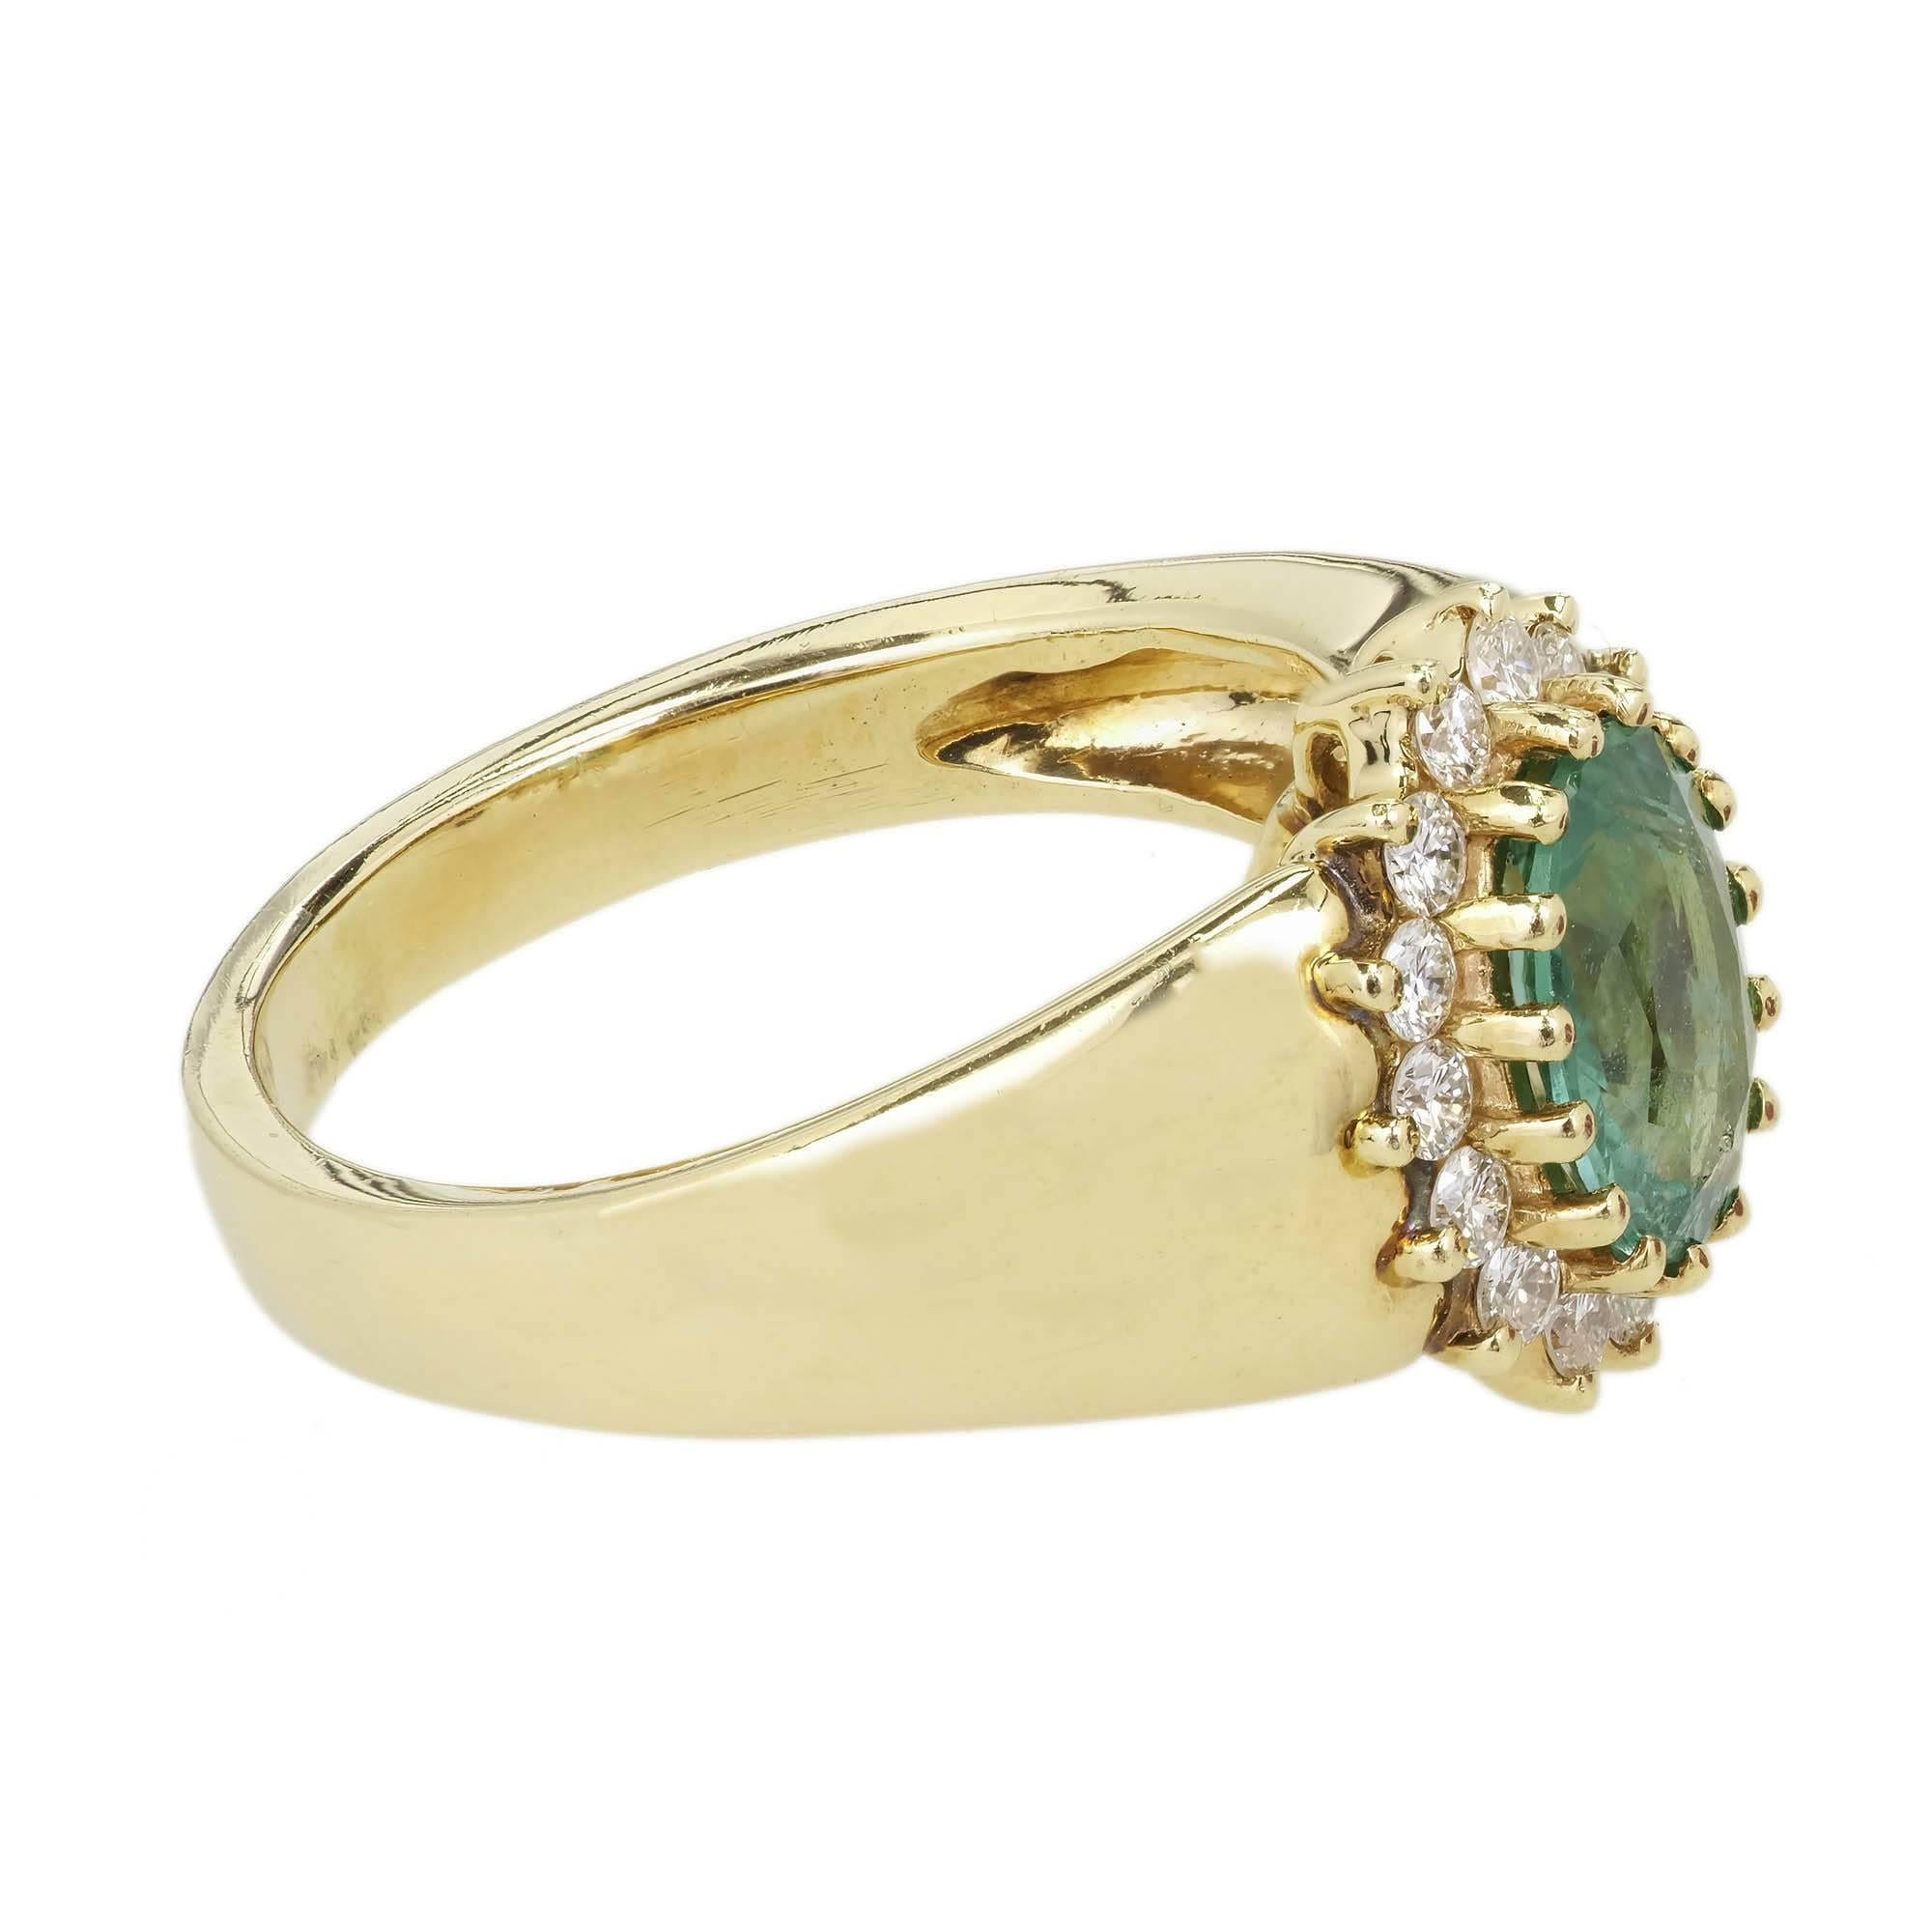  Alfred Butler classic oval Emerald and diamond engagement ring. 1.24ct oval cut center emerald set in a 14k yellow gold setting with a halo of 15 round brilliant cut diamonds. Alfred Butler was known as one of America’s finest manufacturing